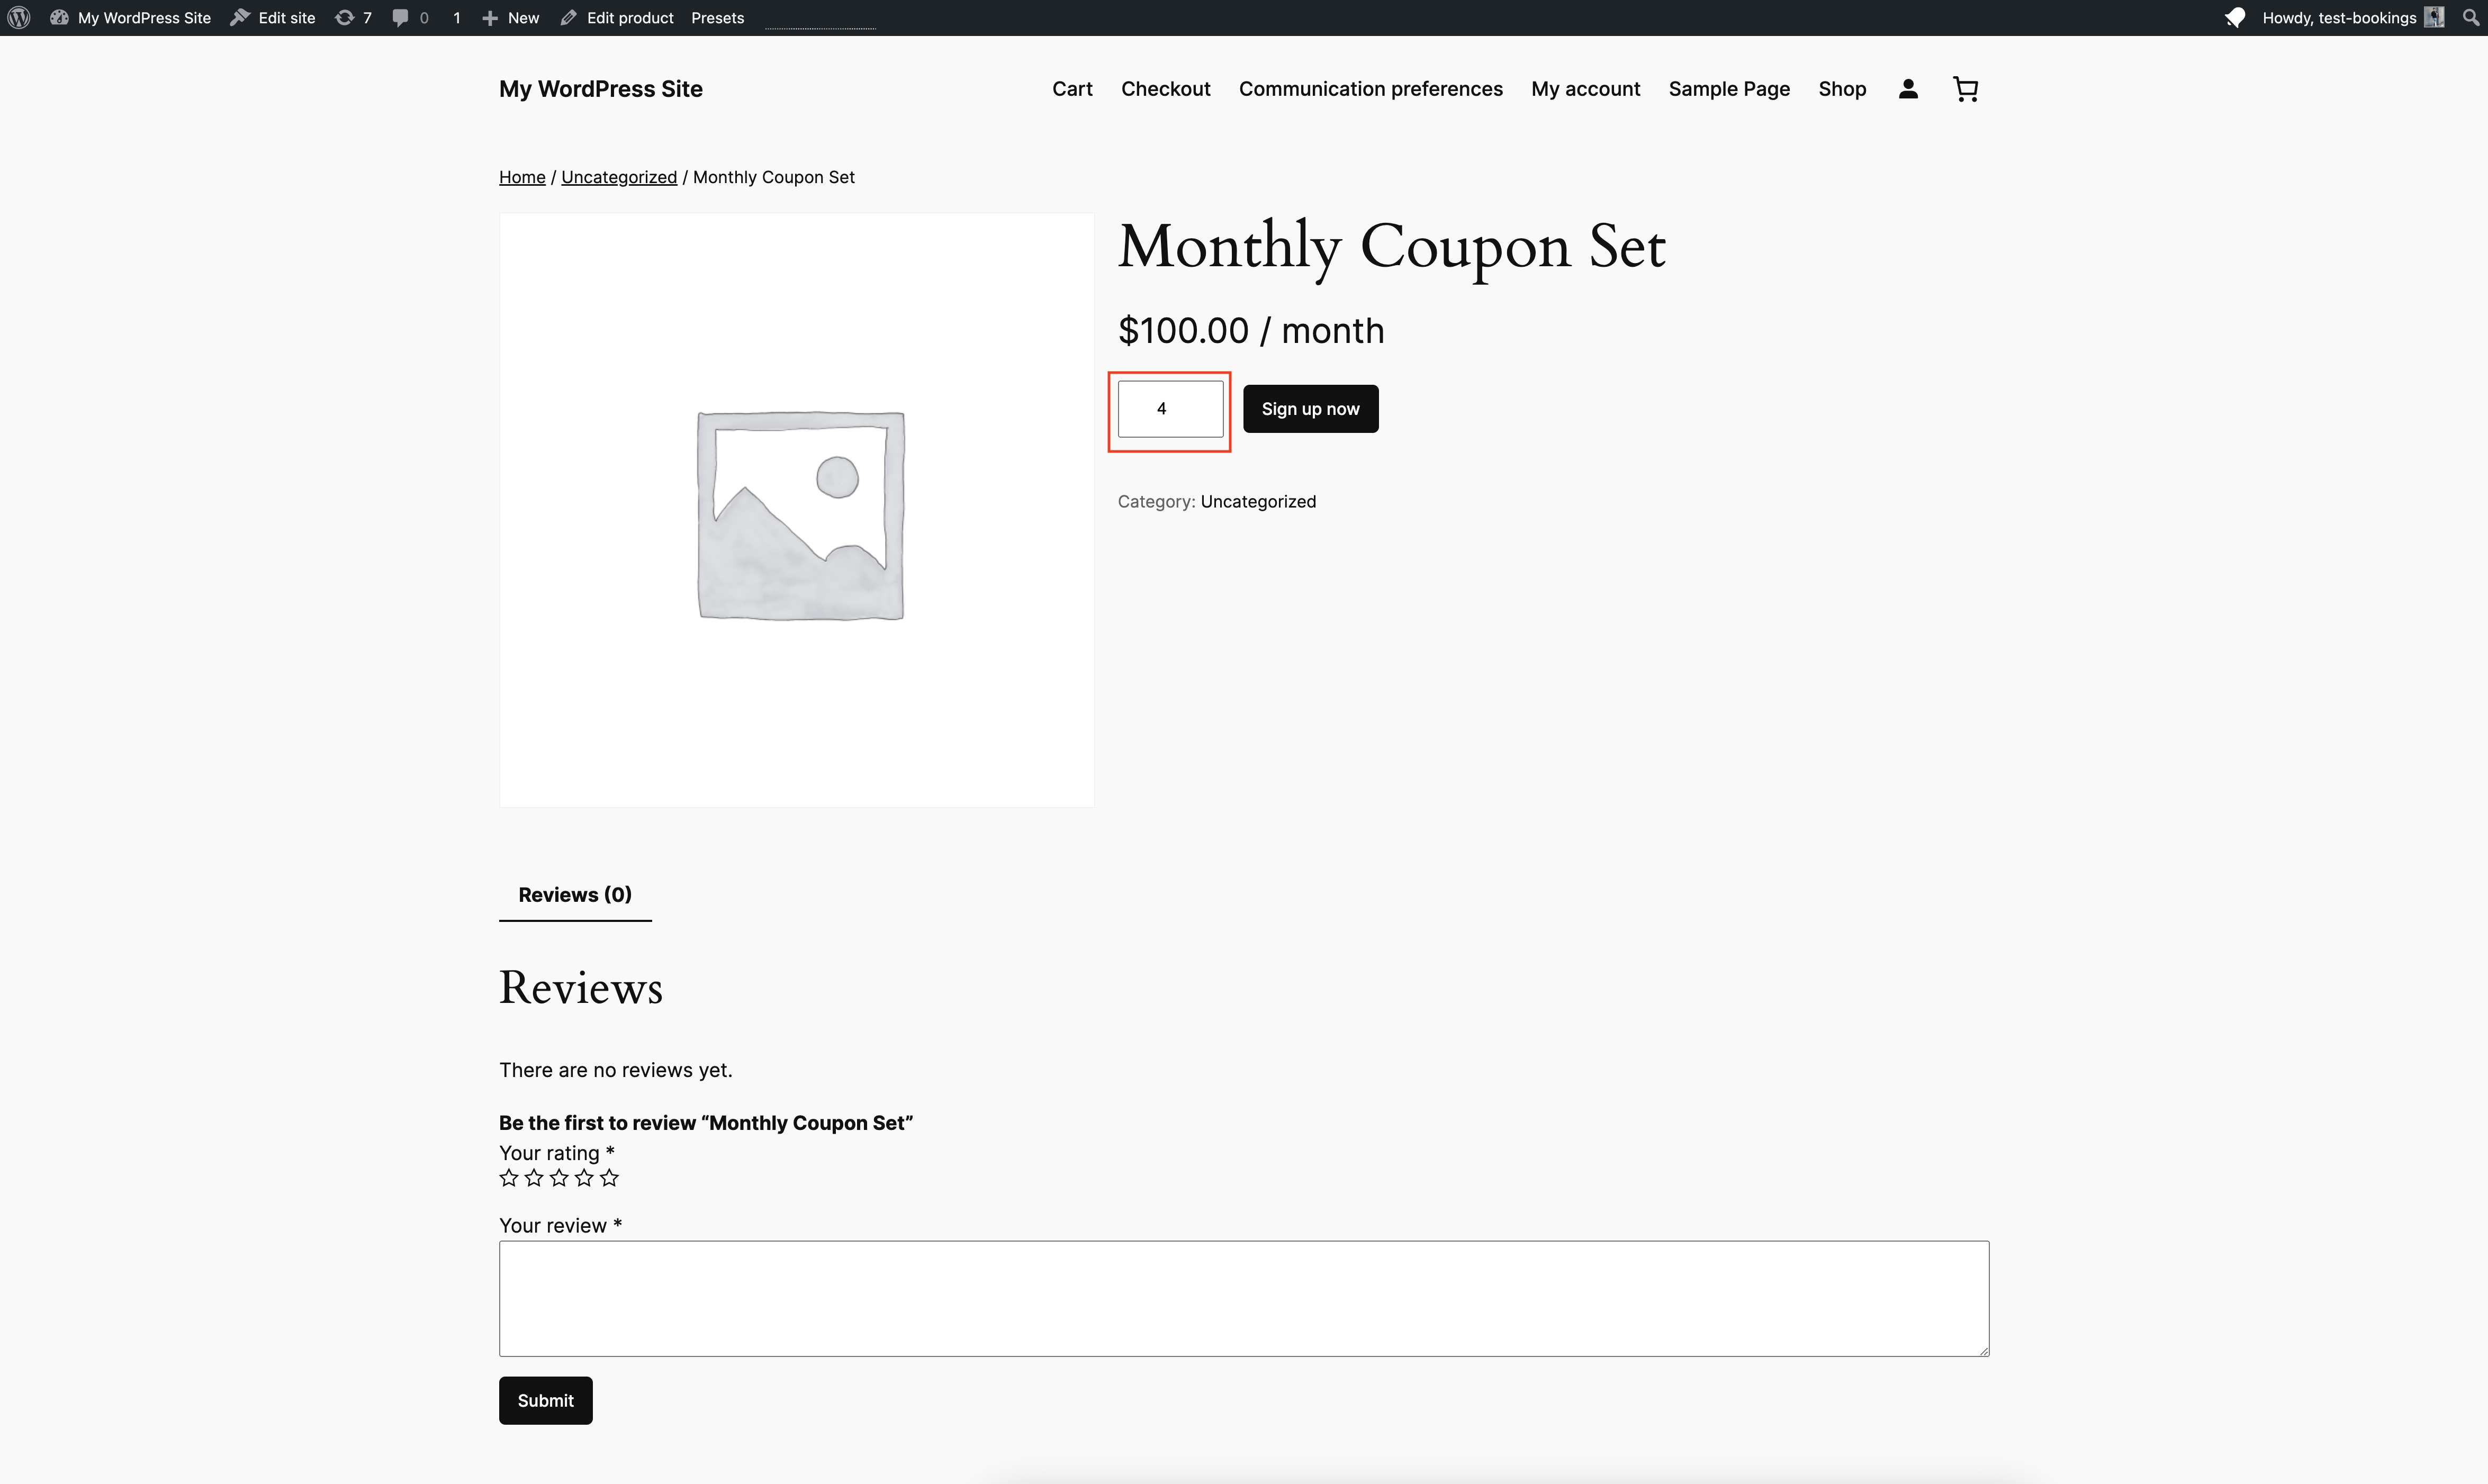 Screenshot of Monthly Coupon Set product that auto-populates with a starting quantity of 4.